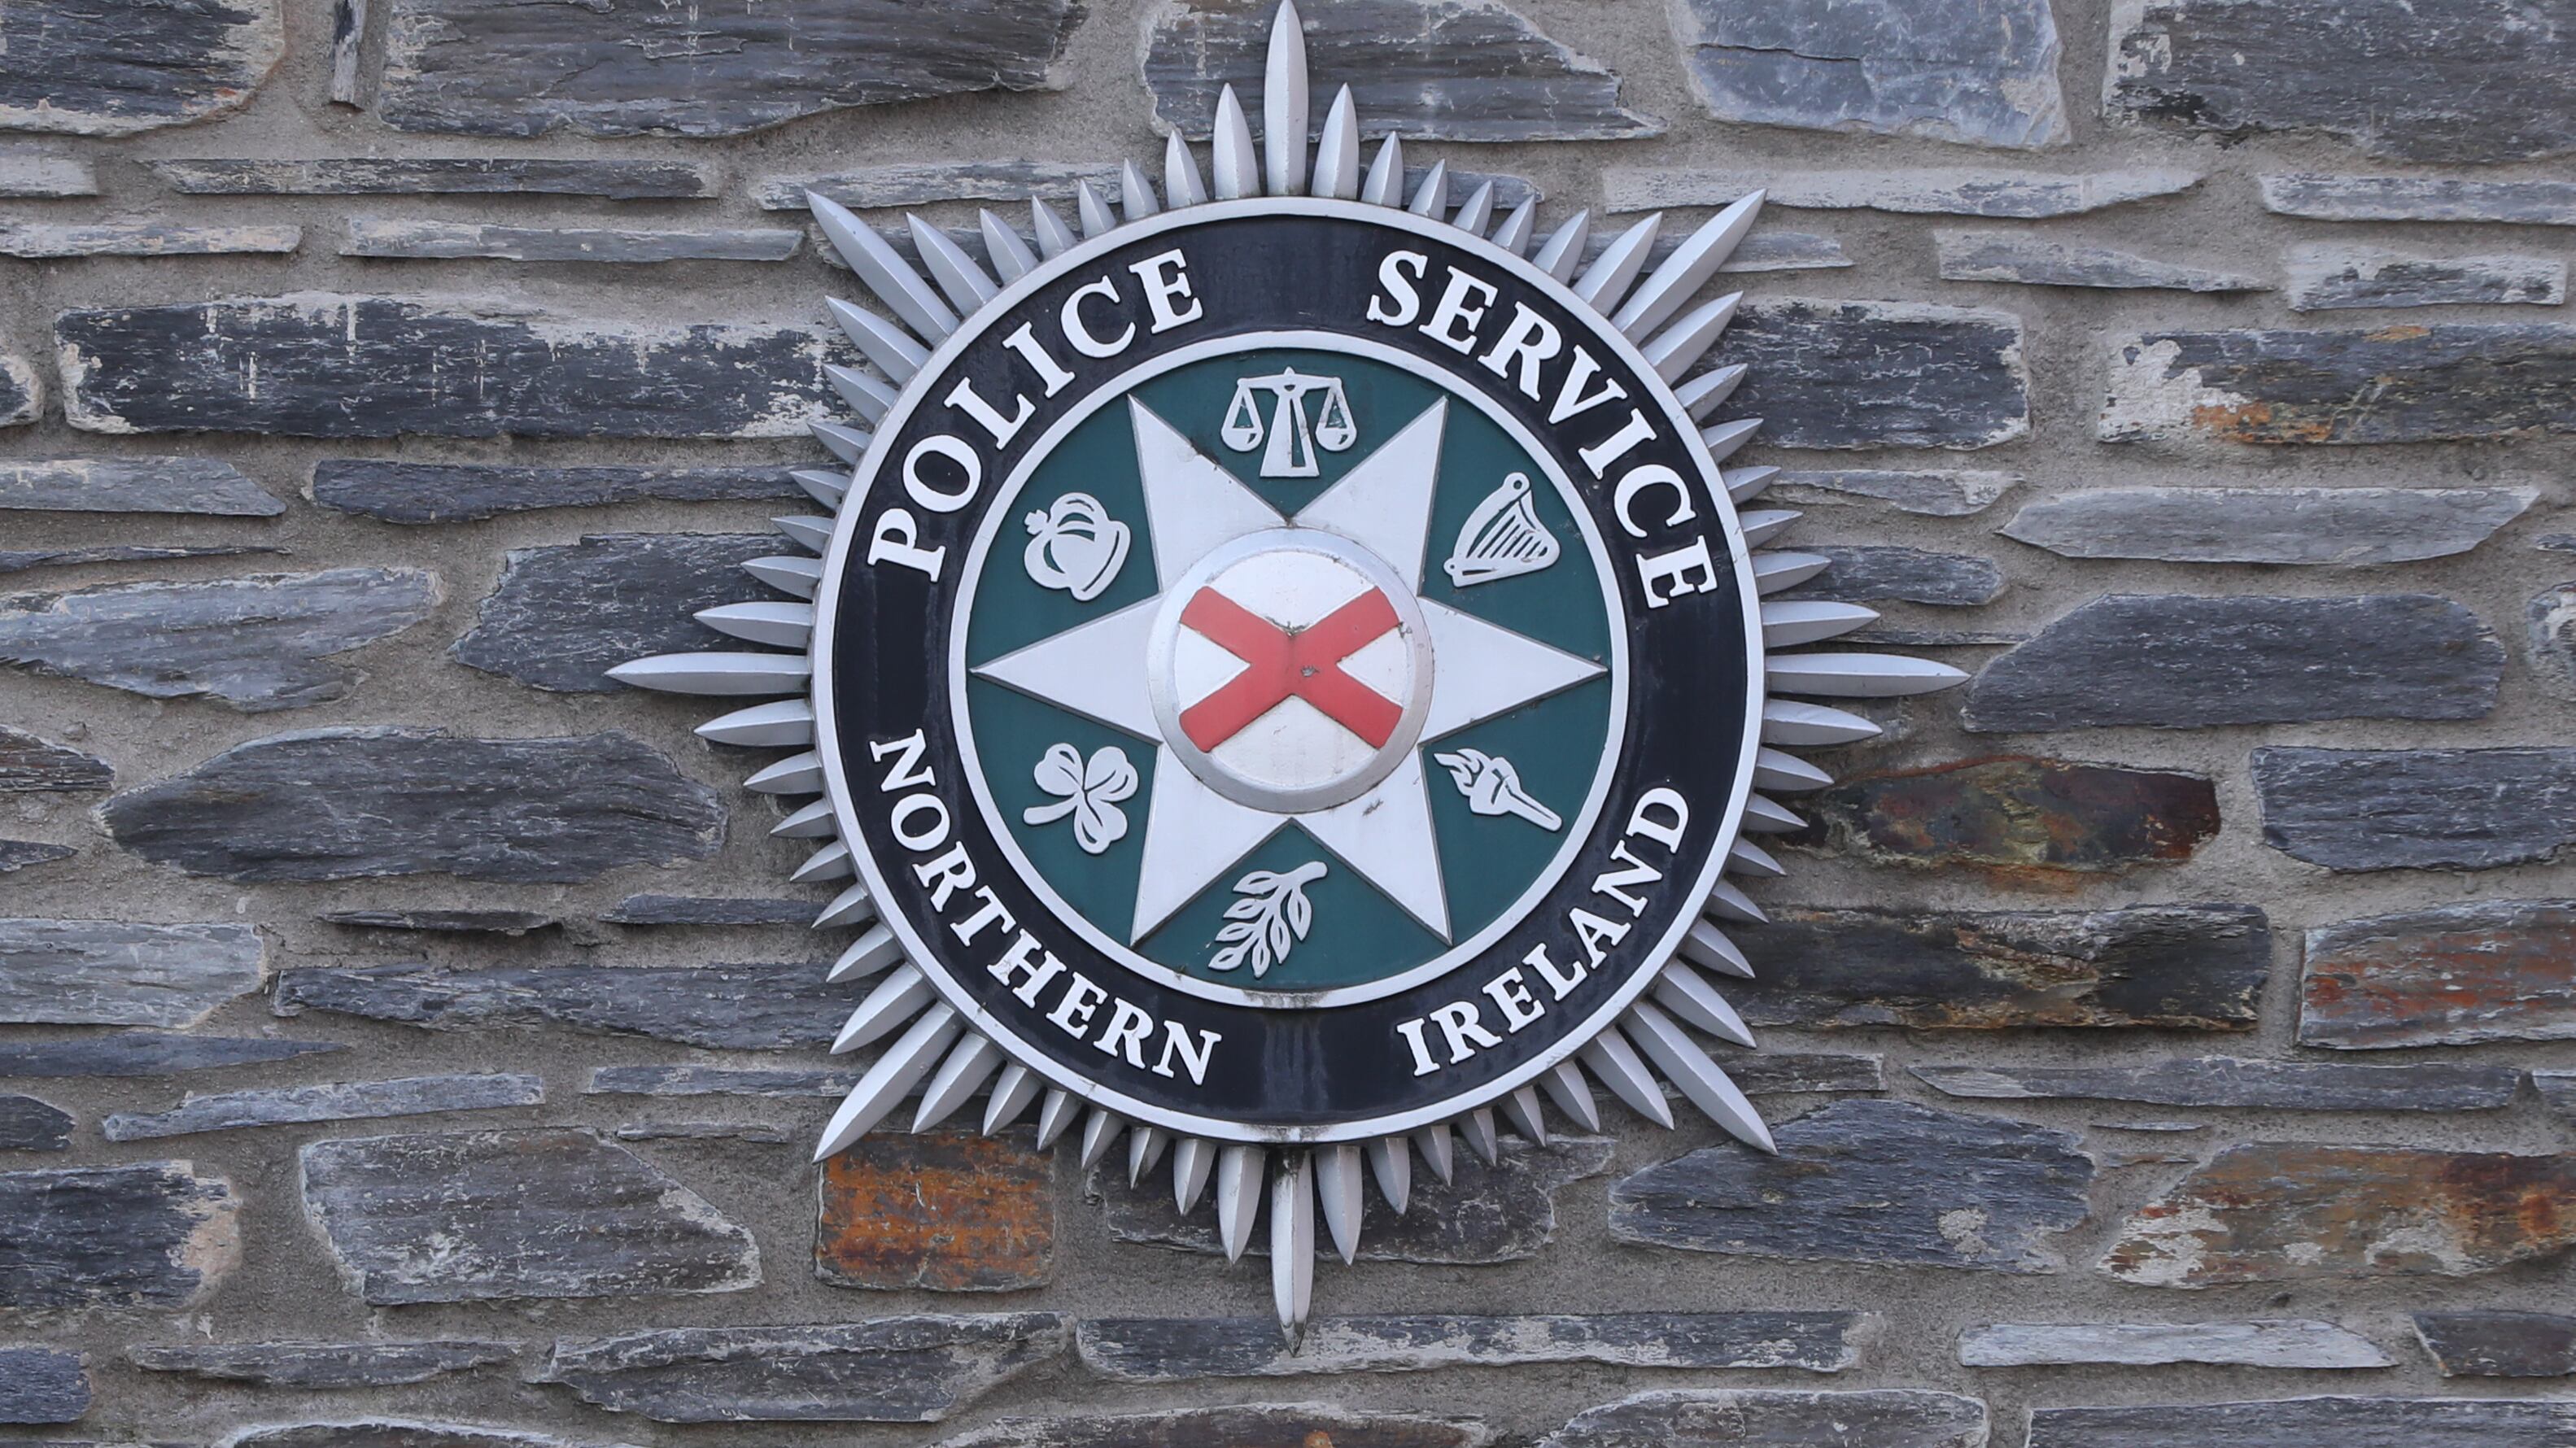 The death in Ballyclare was the third across the region’s roads this weekend